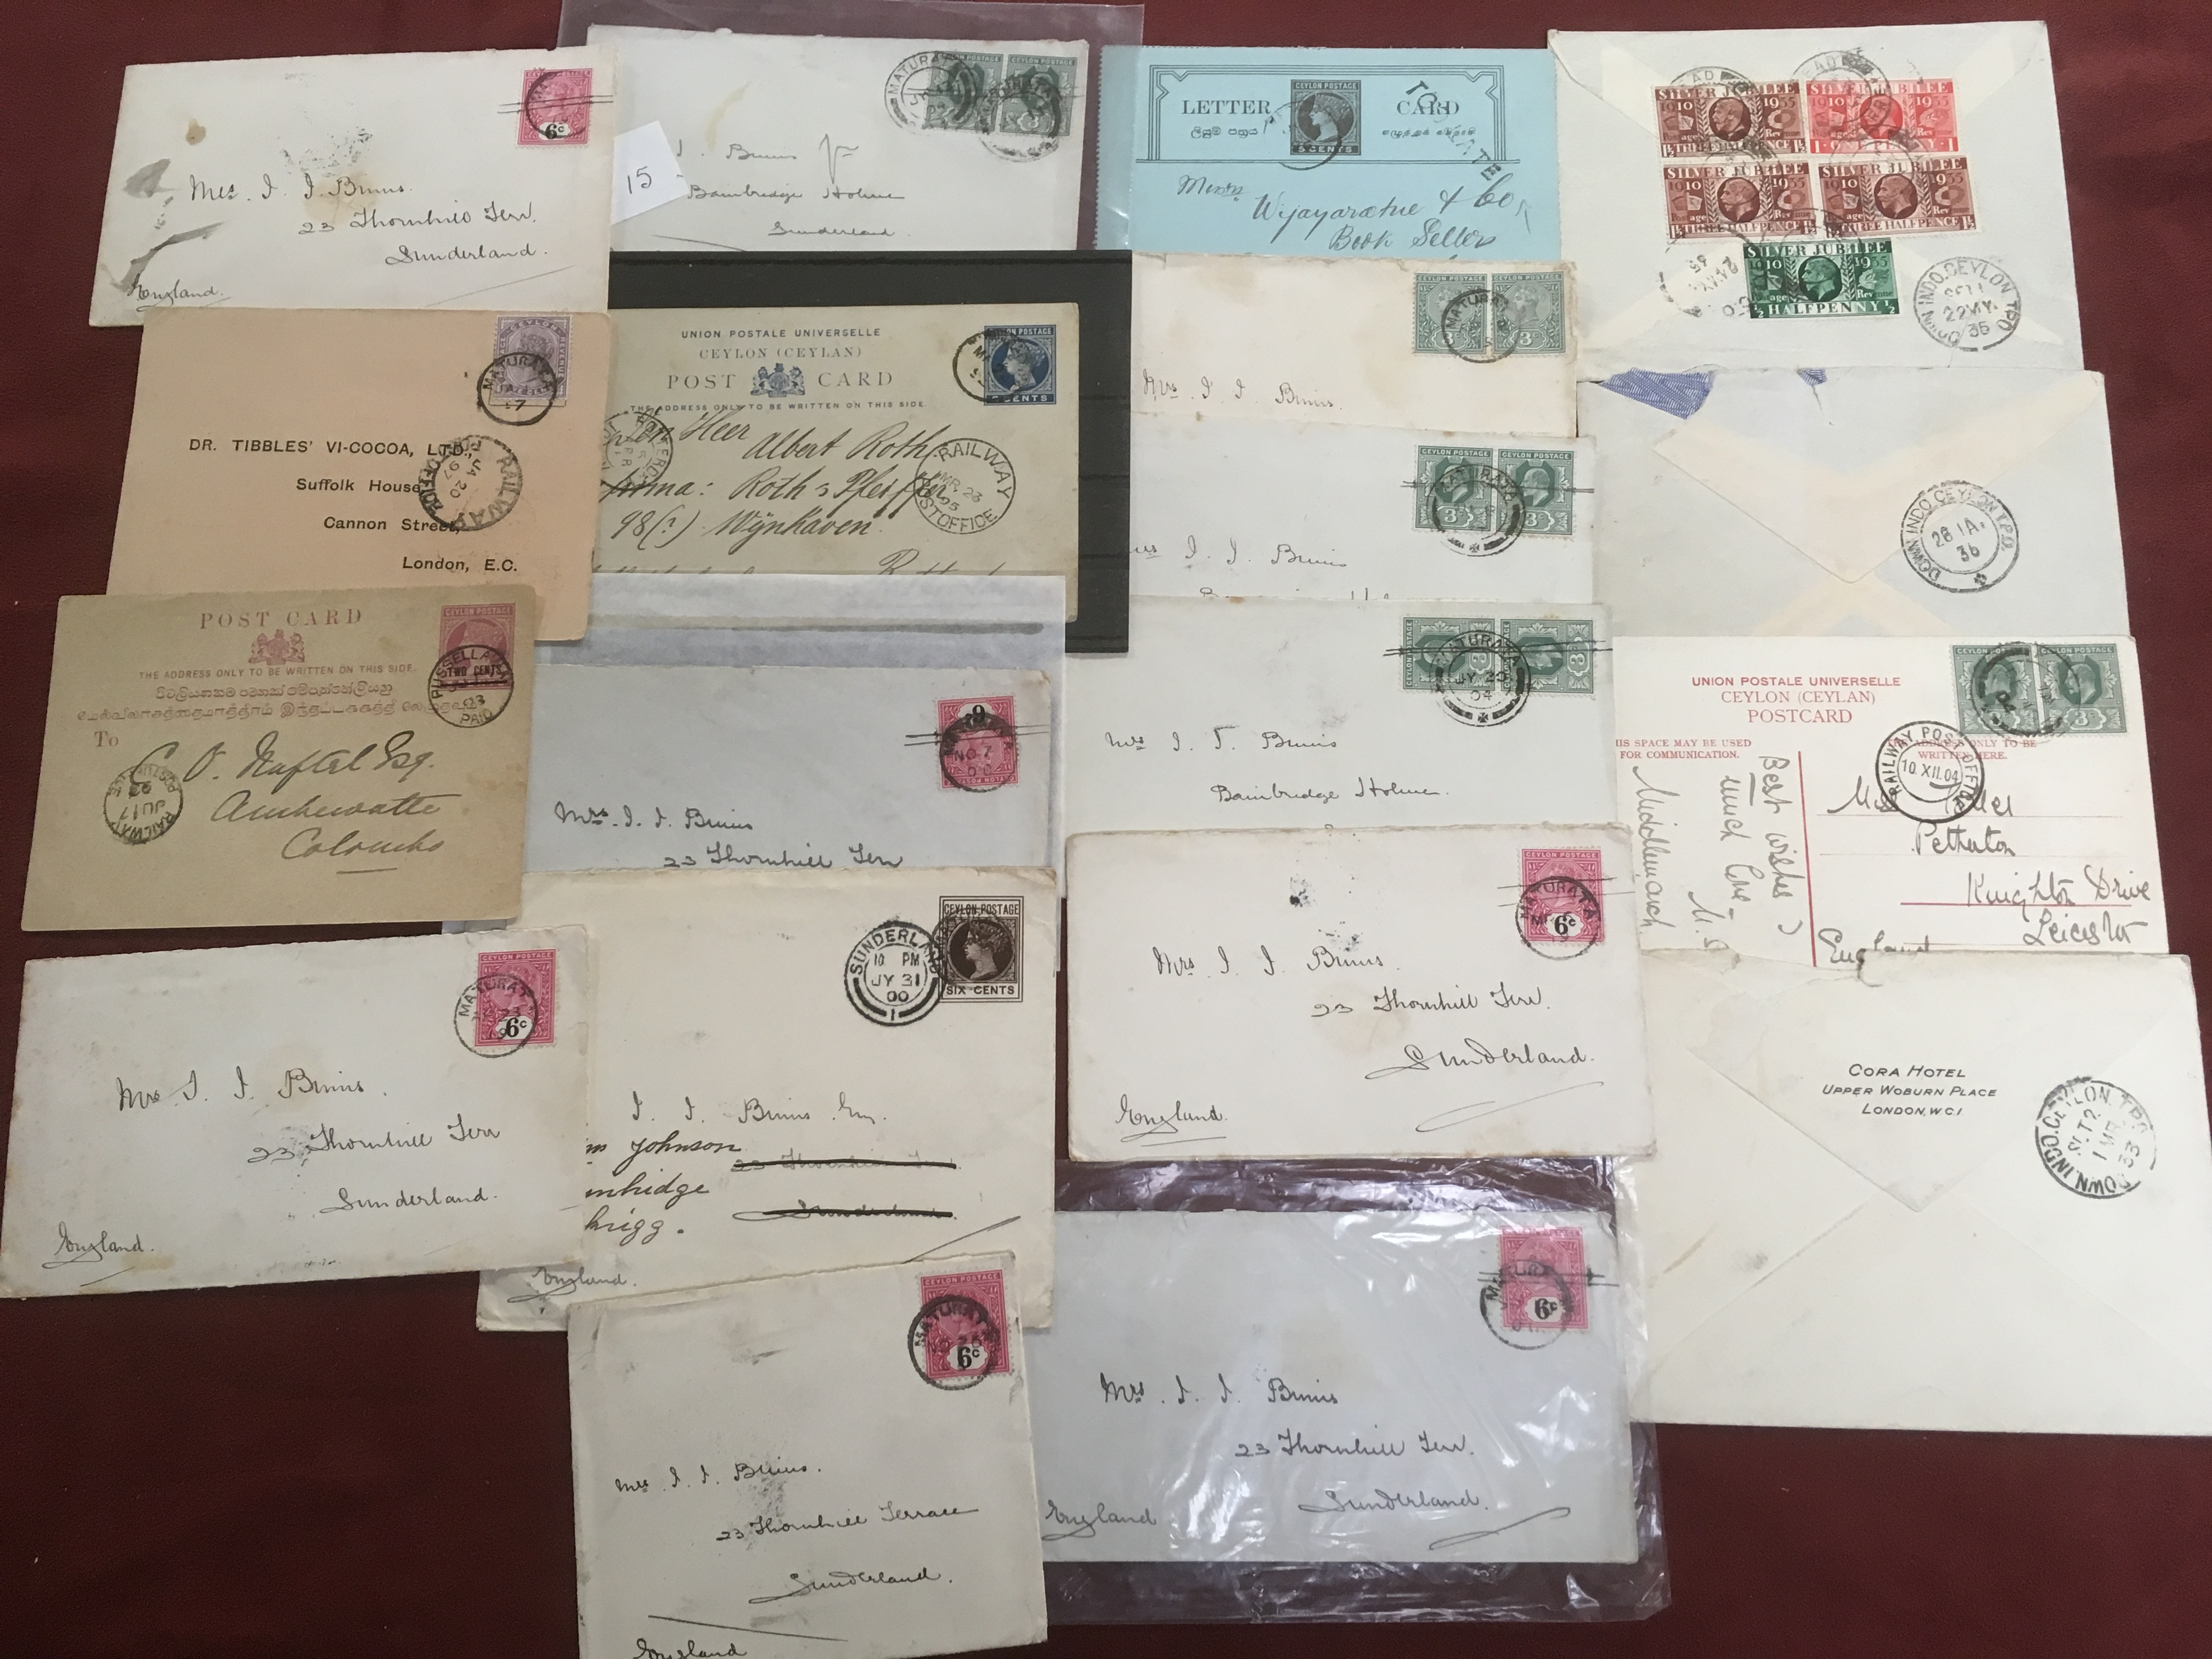 CEYLON: 1893-1936 COVERS AND CARDS WITH RAILWAY POST OFFICE POSTMARKS (19)